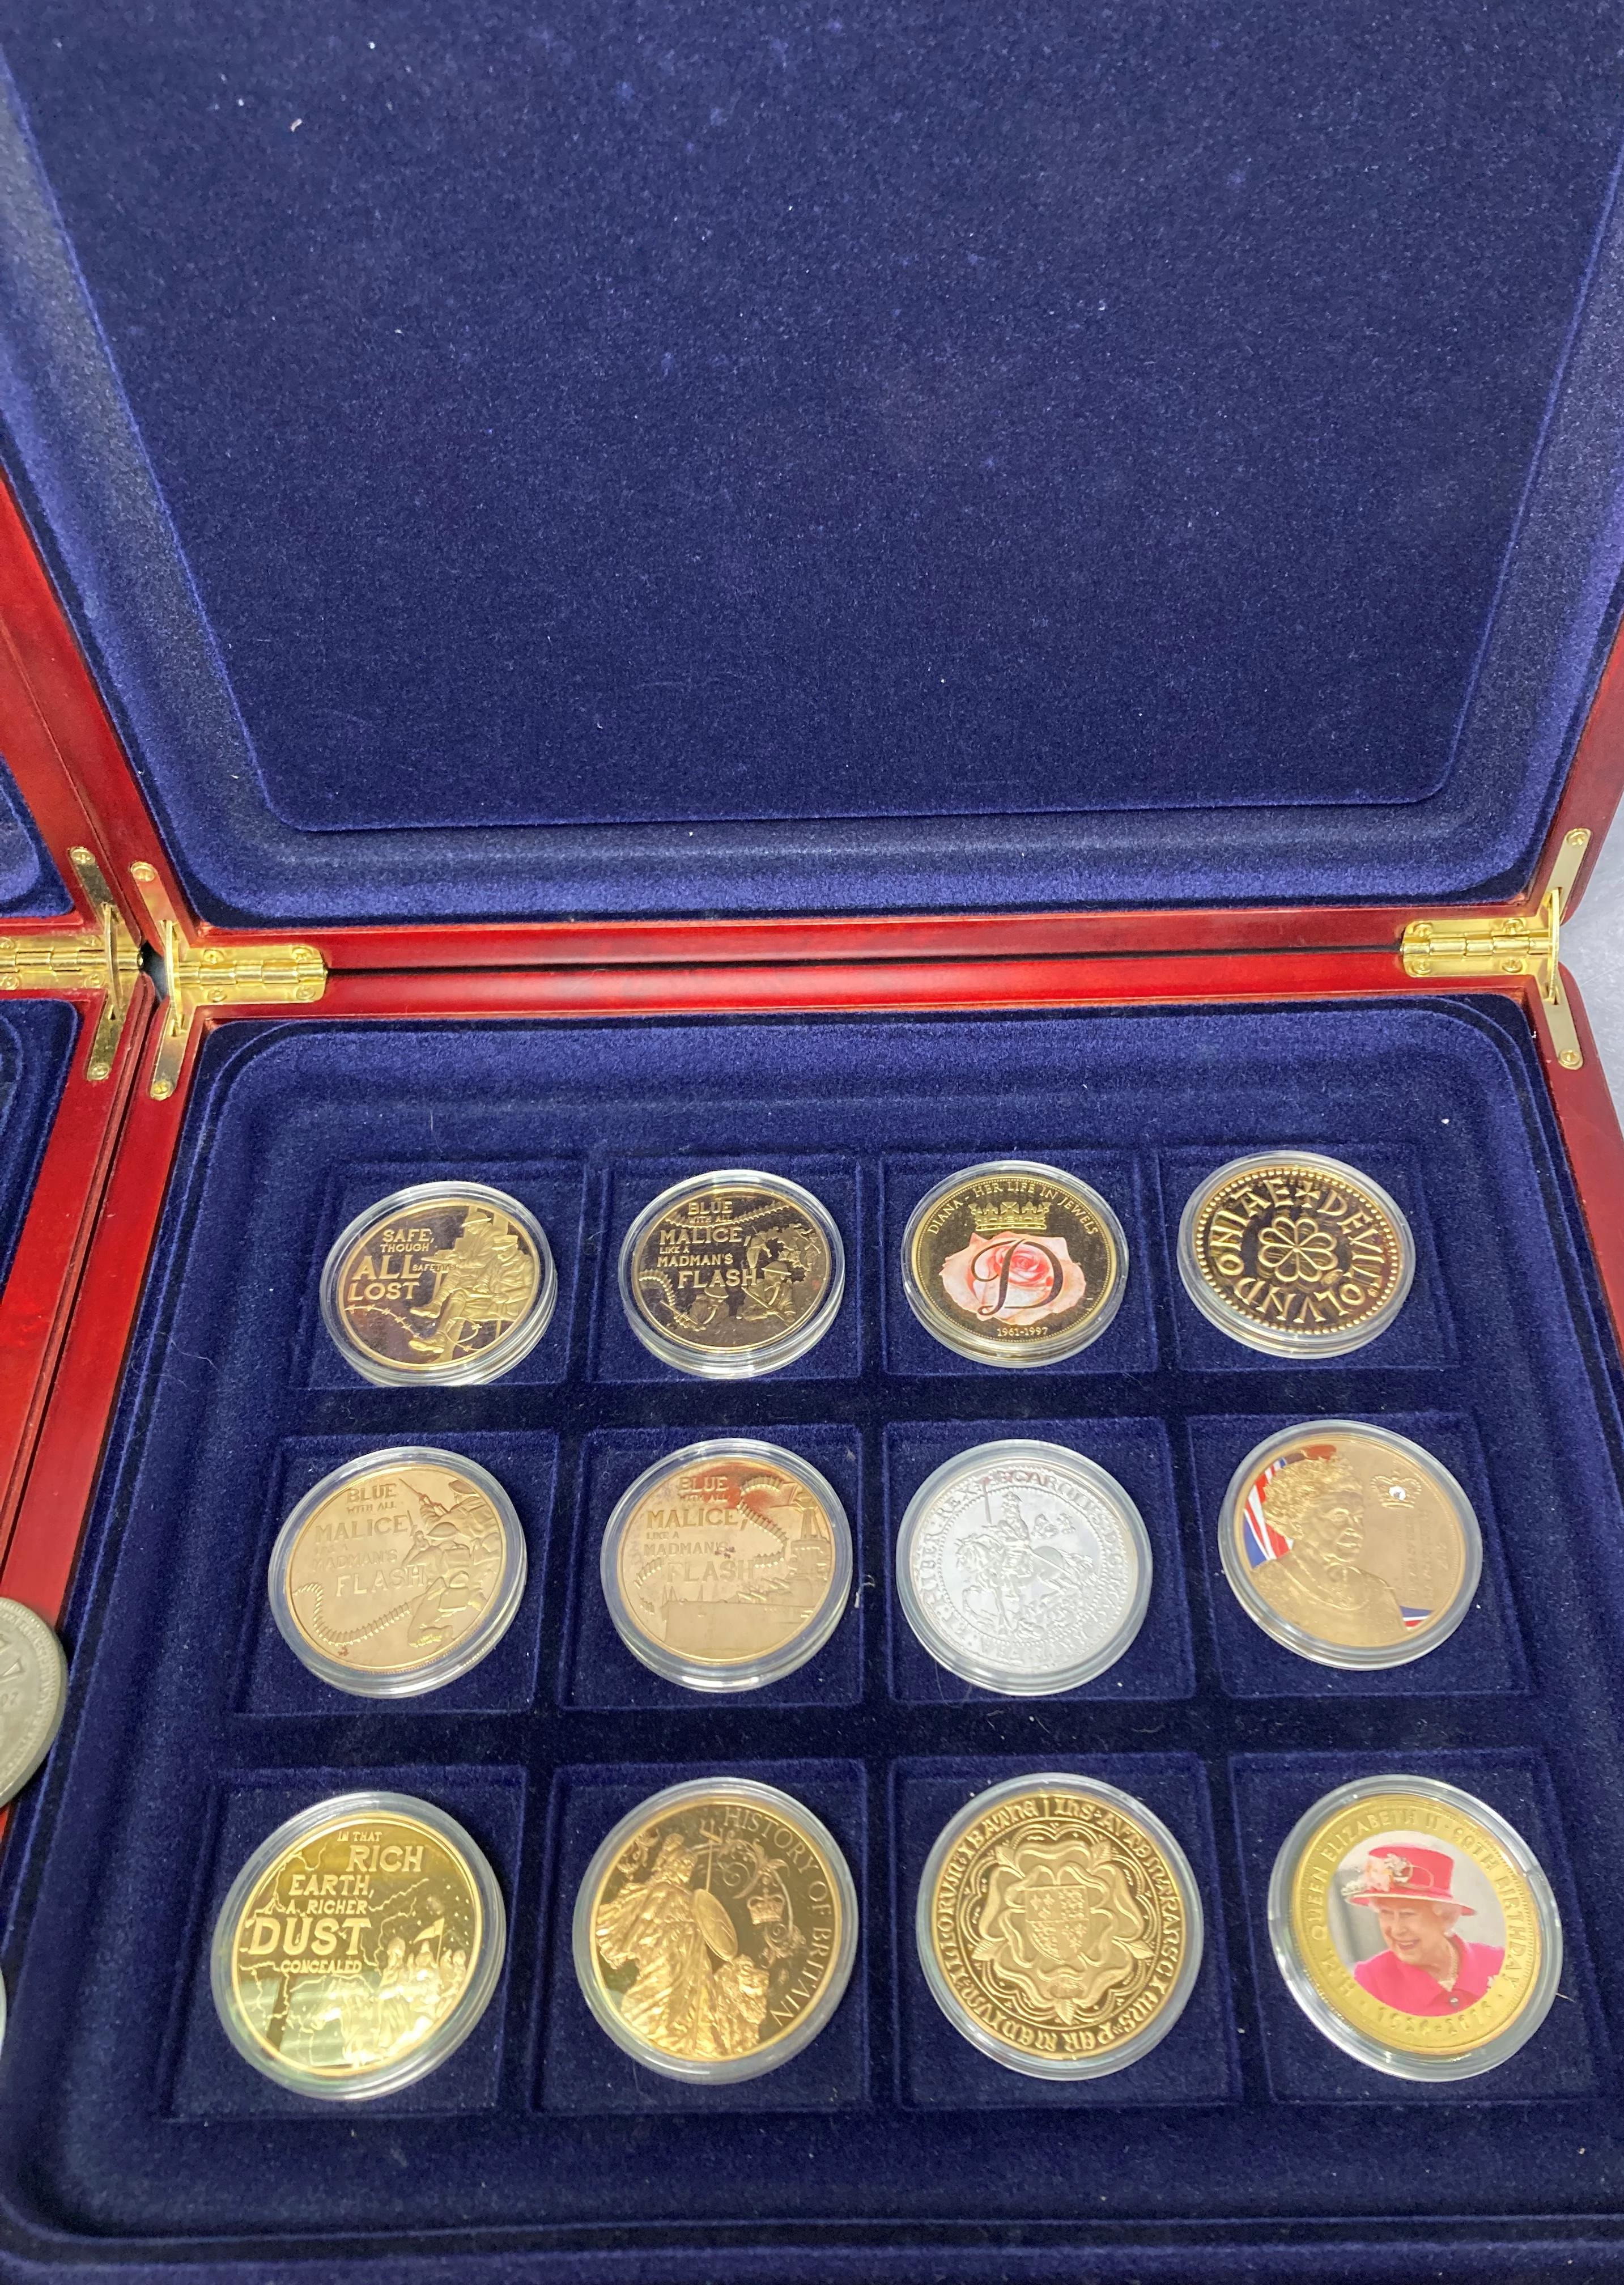 Contents to two fitted coin cases - twenty-six assorted commemorative coins some in silver and gold - Image 3 of 4